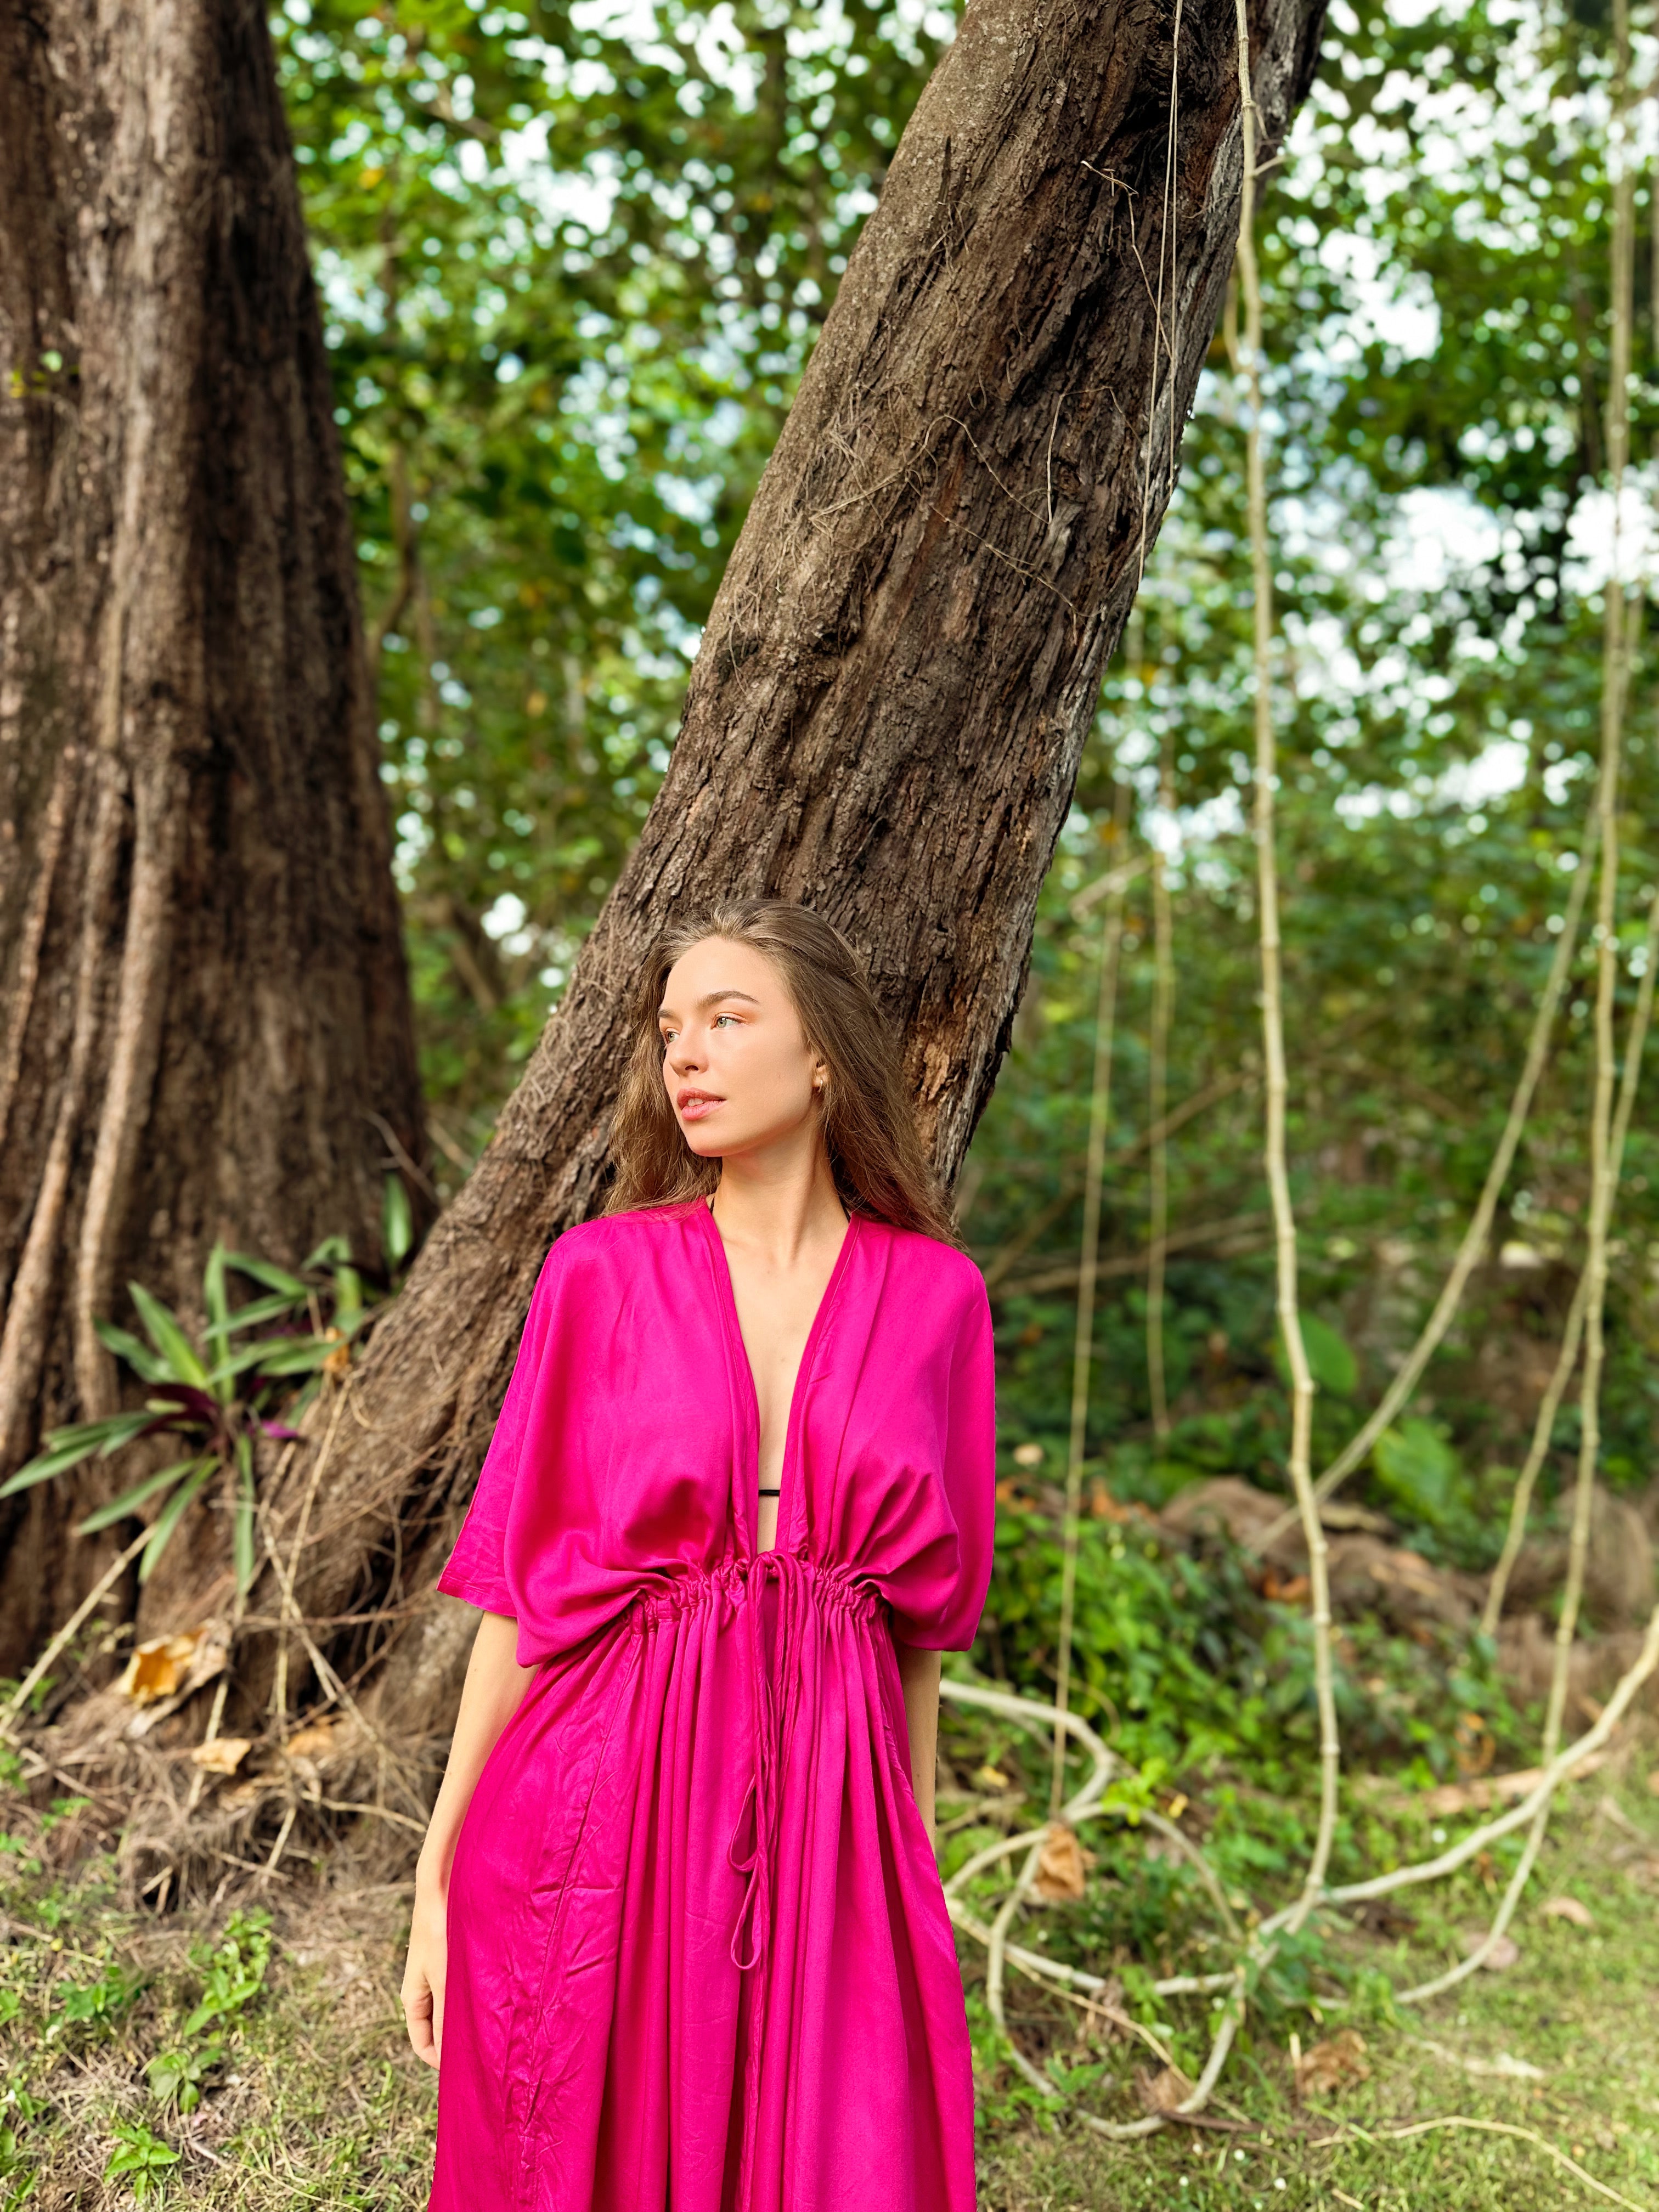 Shop Pink Kaftan Dress in limitless comfort and elegance with our Goddess Kaftan Maxi Dress Dyed fuchsia kaftan maxi dress. This fuchsia maxi dress is the perfect vacation wear with Coco de Chom?